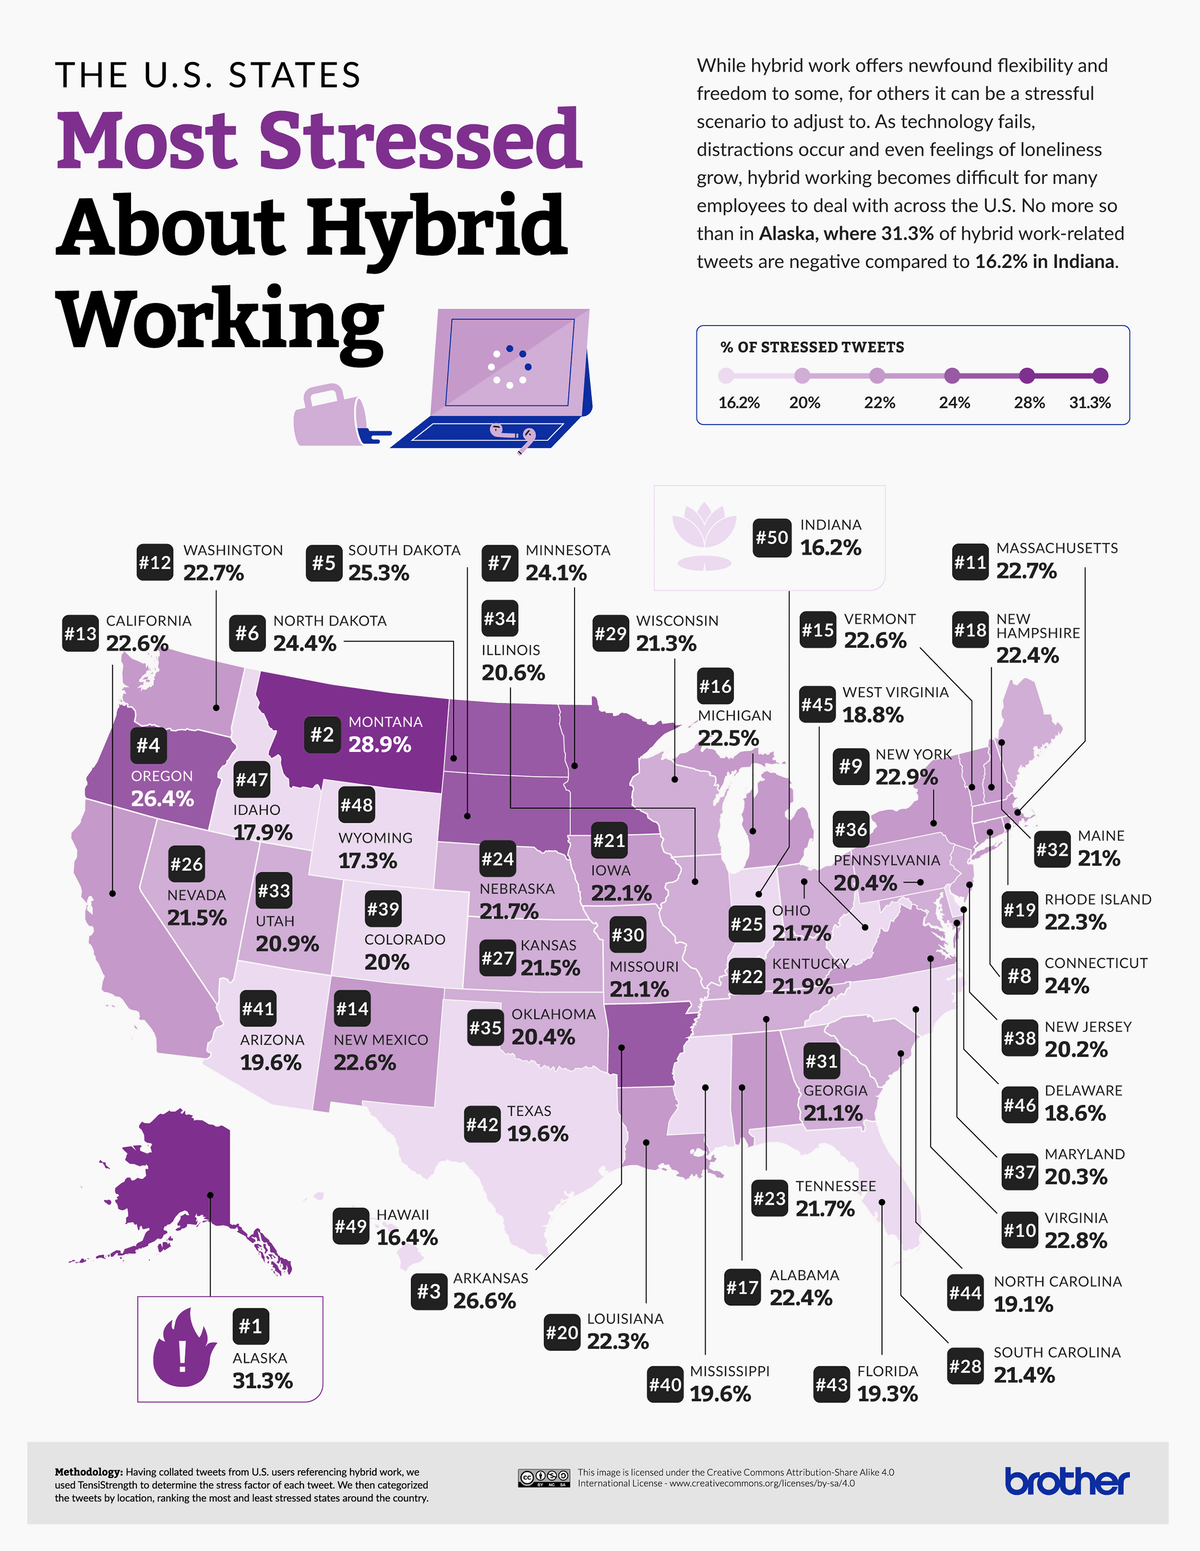 Infographic: The U.S. states most stressed about hybrid working